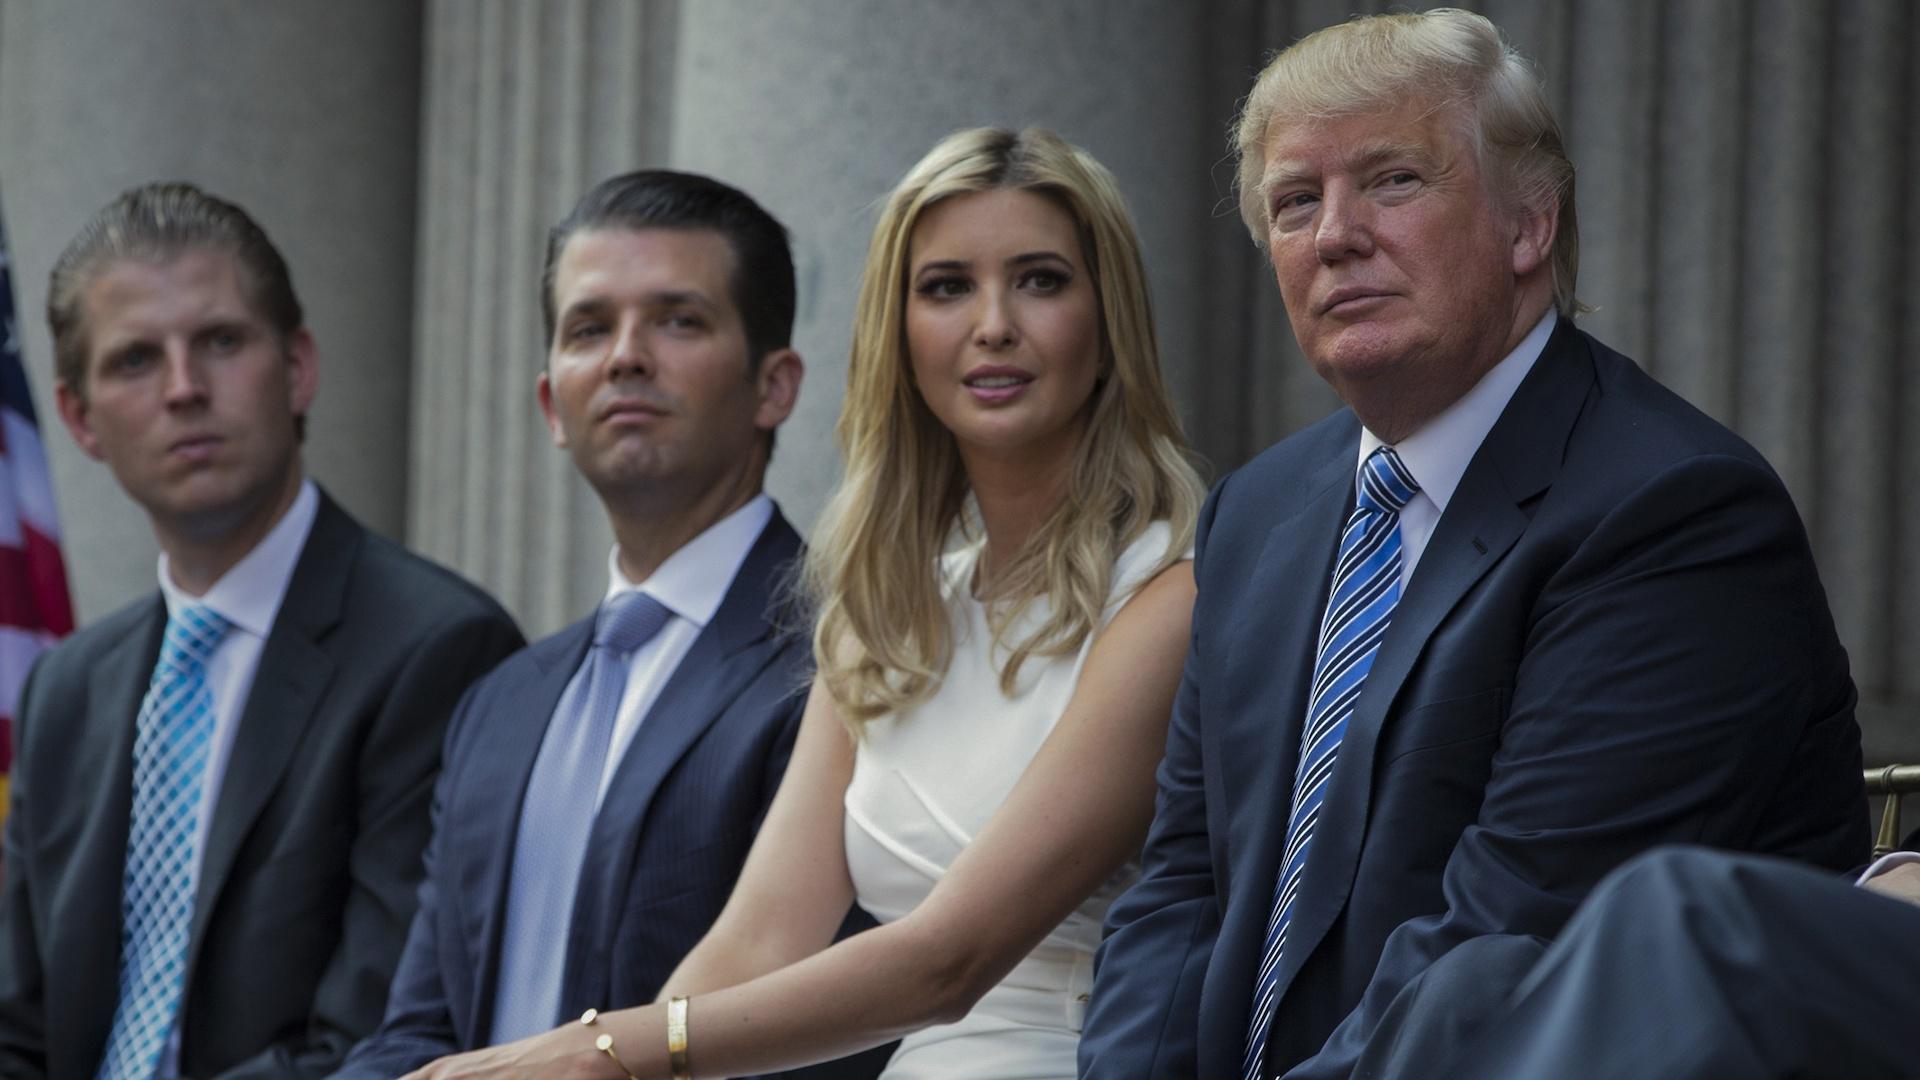 Donald Trump, right, sits with his children, from left, Eric Trump, Donald Trump Jr., and Ivanka Trump during a groundbreaking ceremony for the Trump International Hotel on July 23, 2014, in Washington. (AP Photo/Evan Vucci, File)